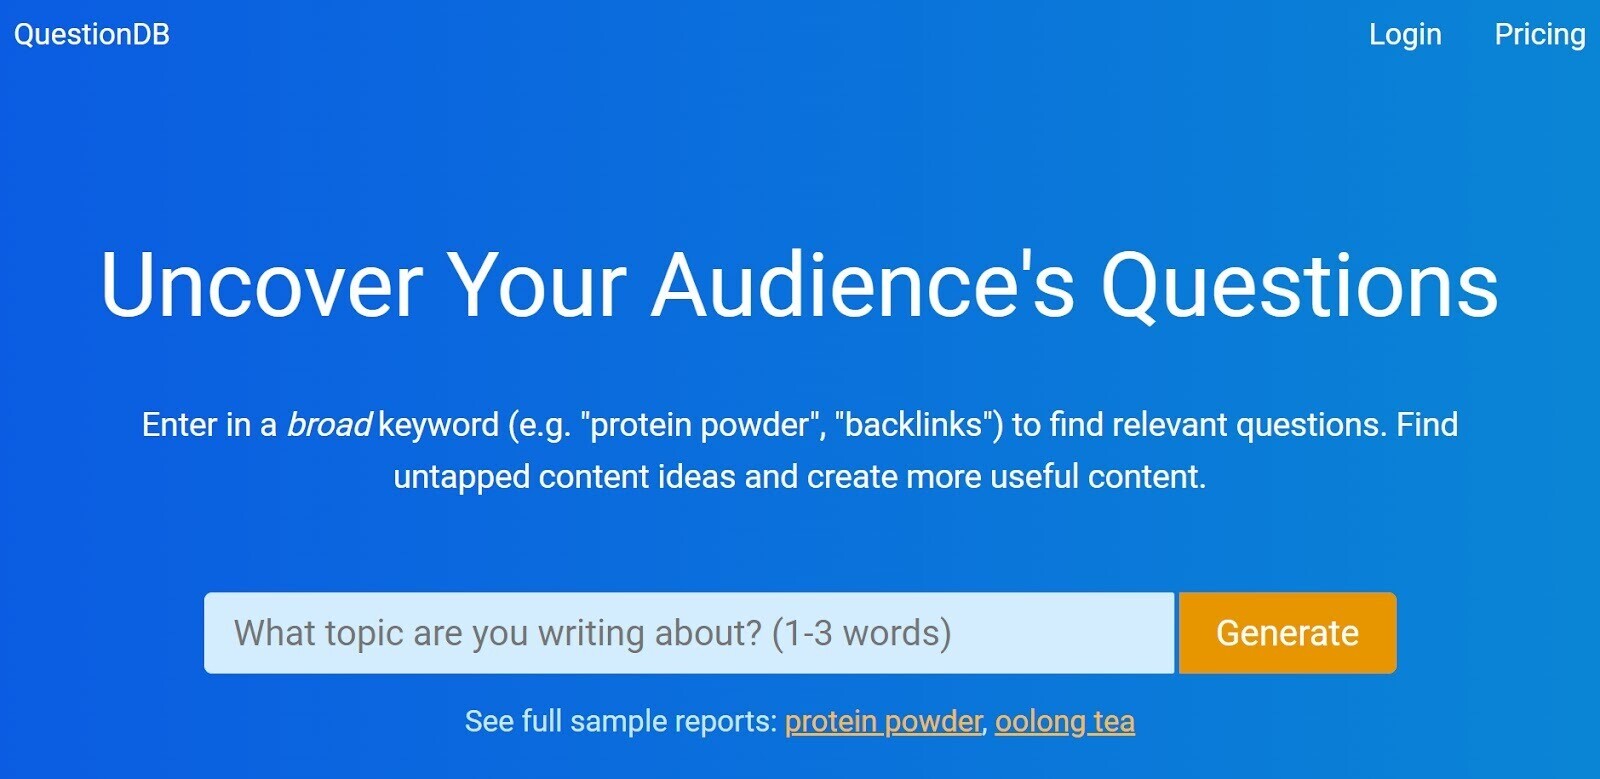 QuestionDB homepage with title "Uncover Your Audience´s Questions"